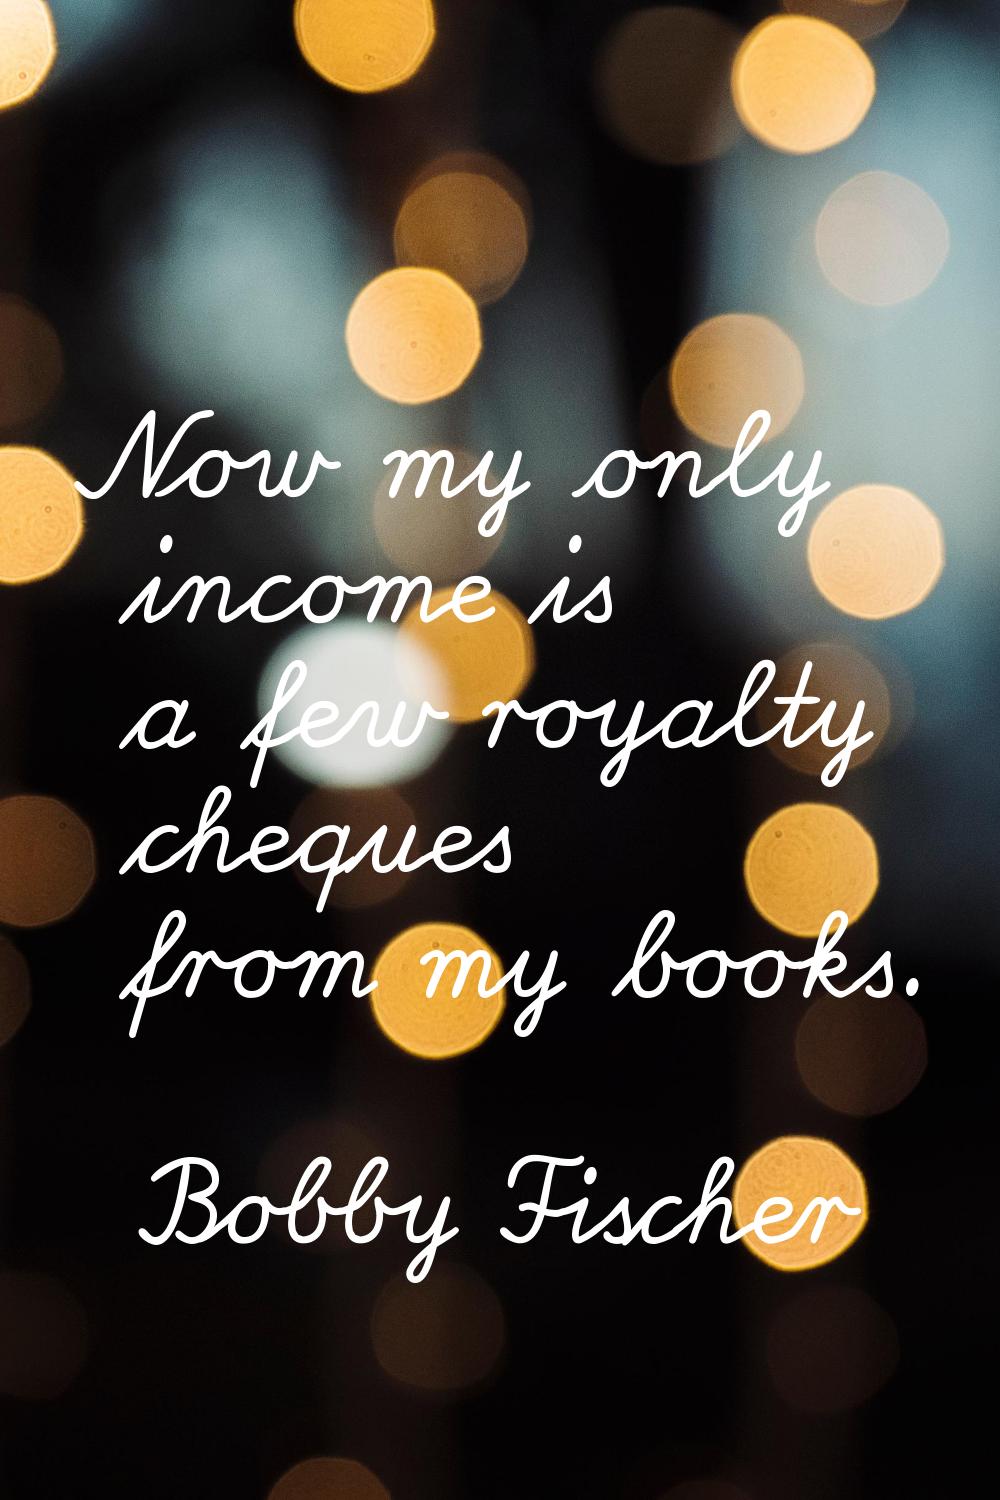 Now my only income is a few royalty cheques from my books.